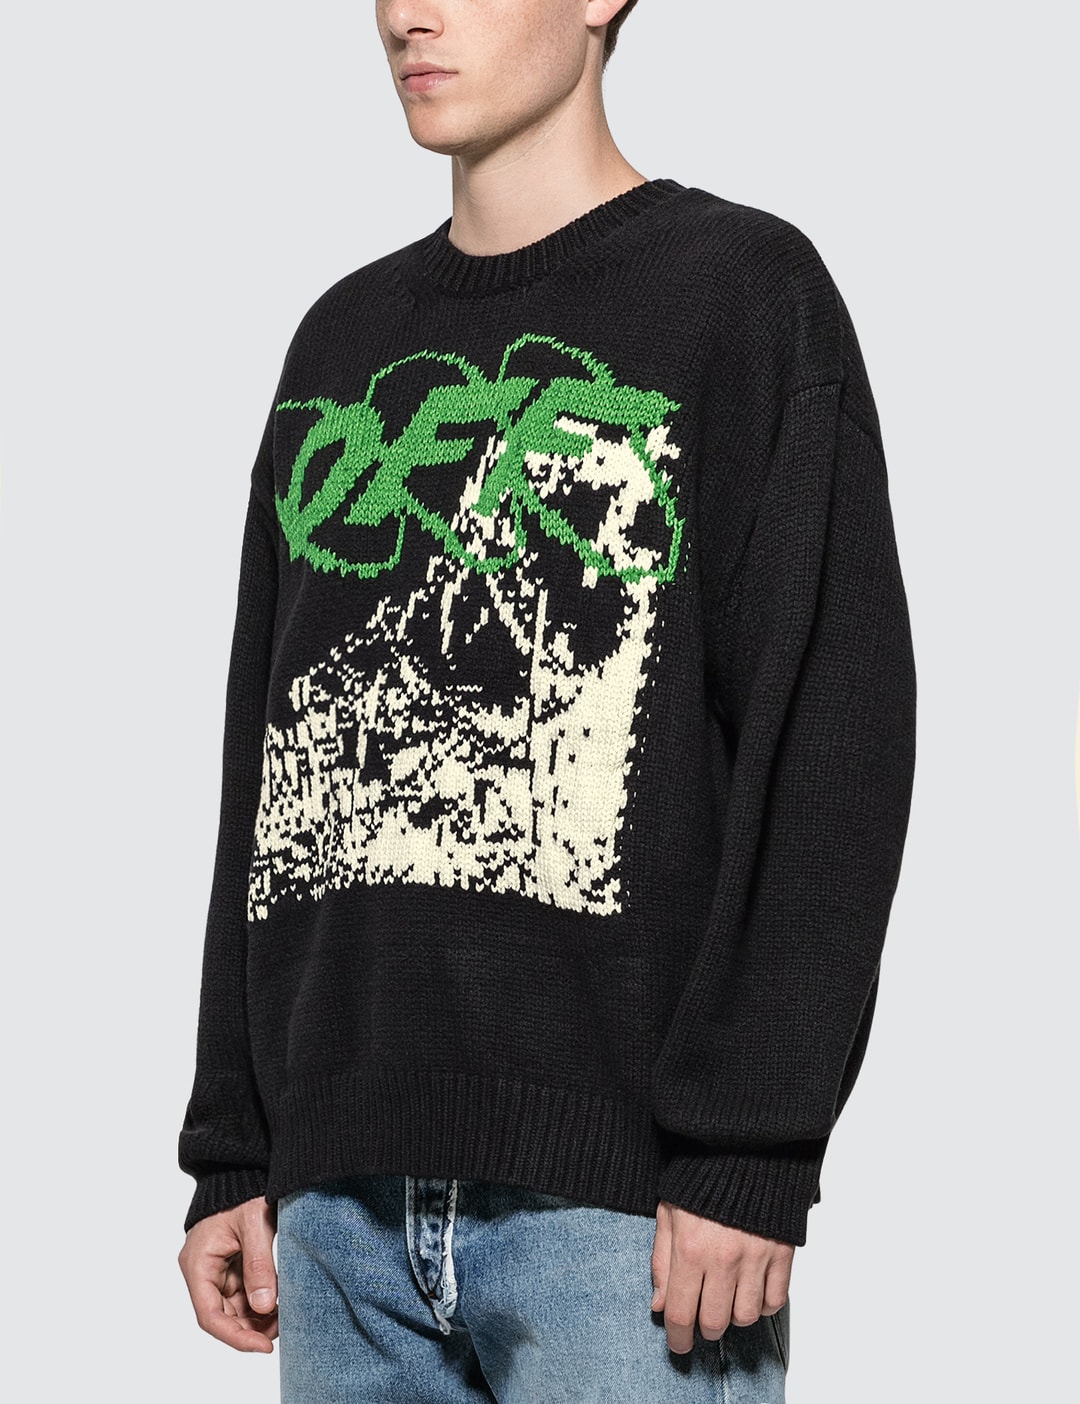 Ressource Grad Celsius Vordertyp off white ruined factory knit sweater ...